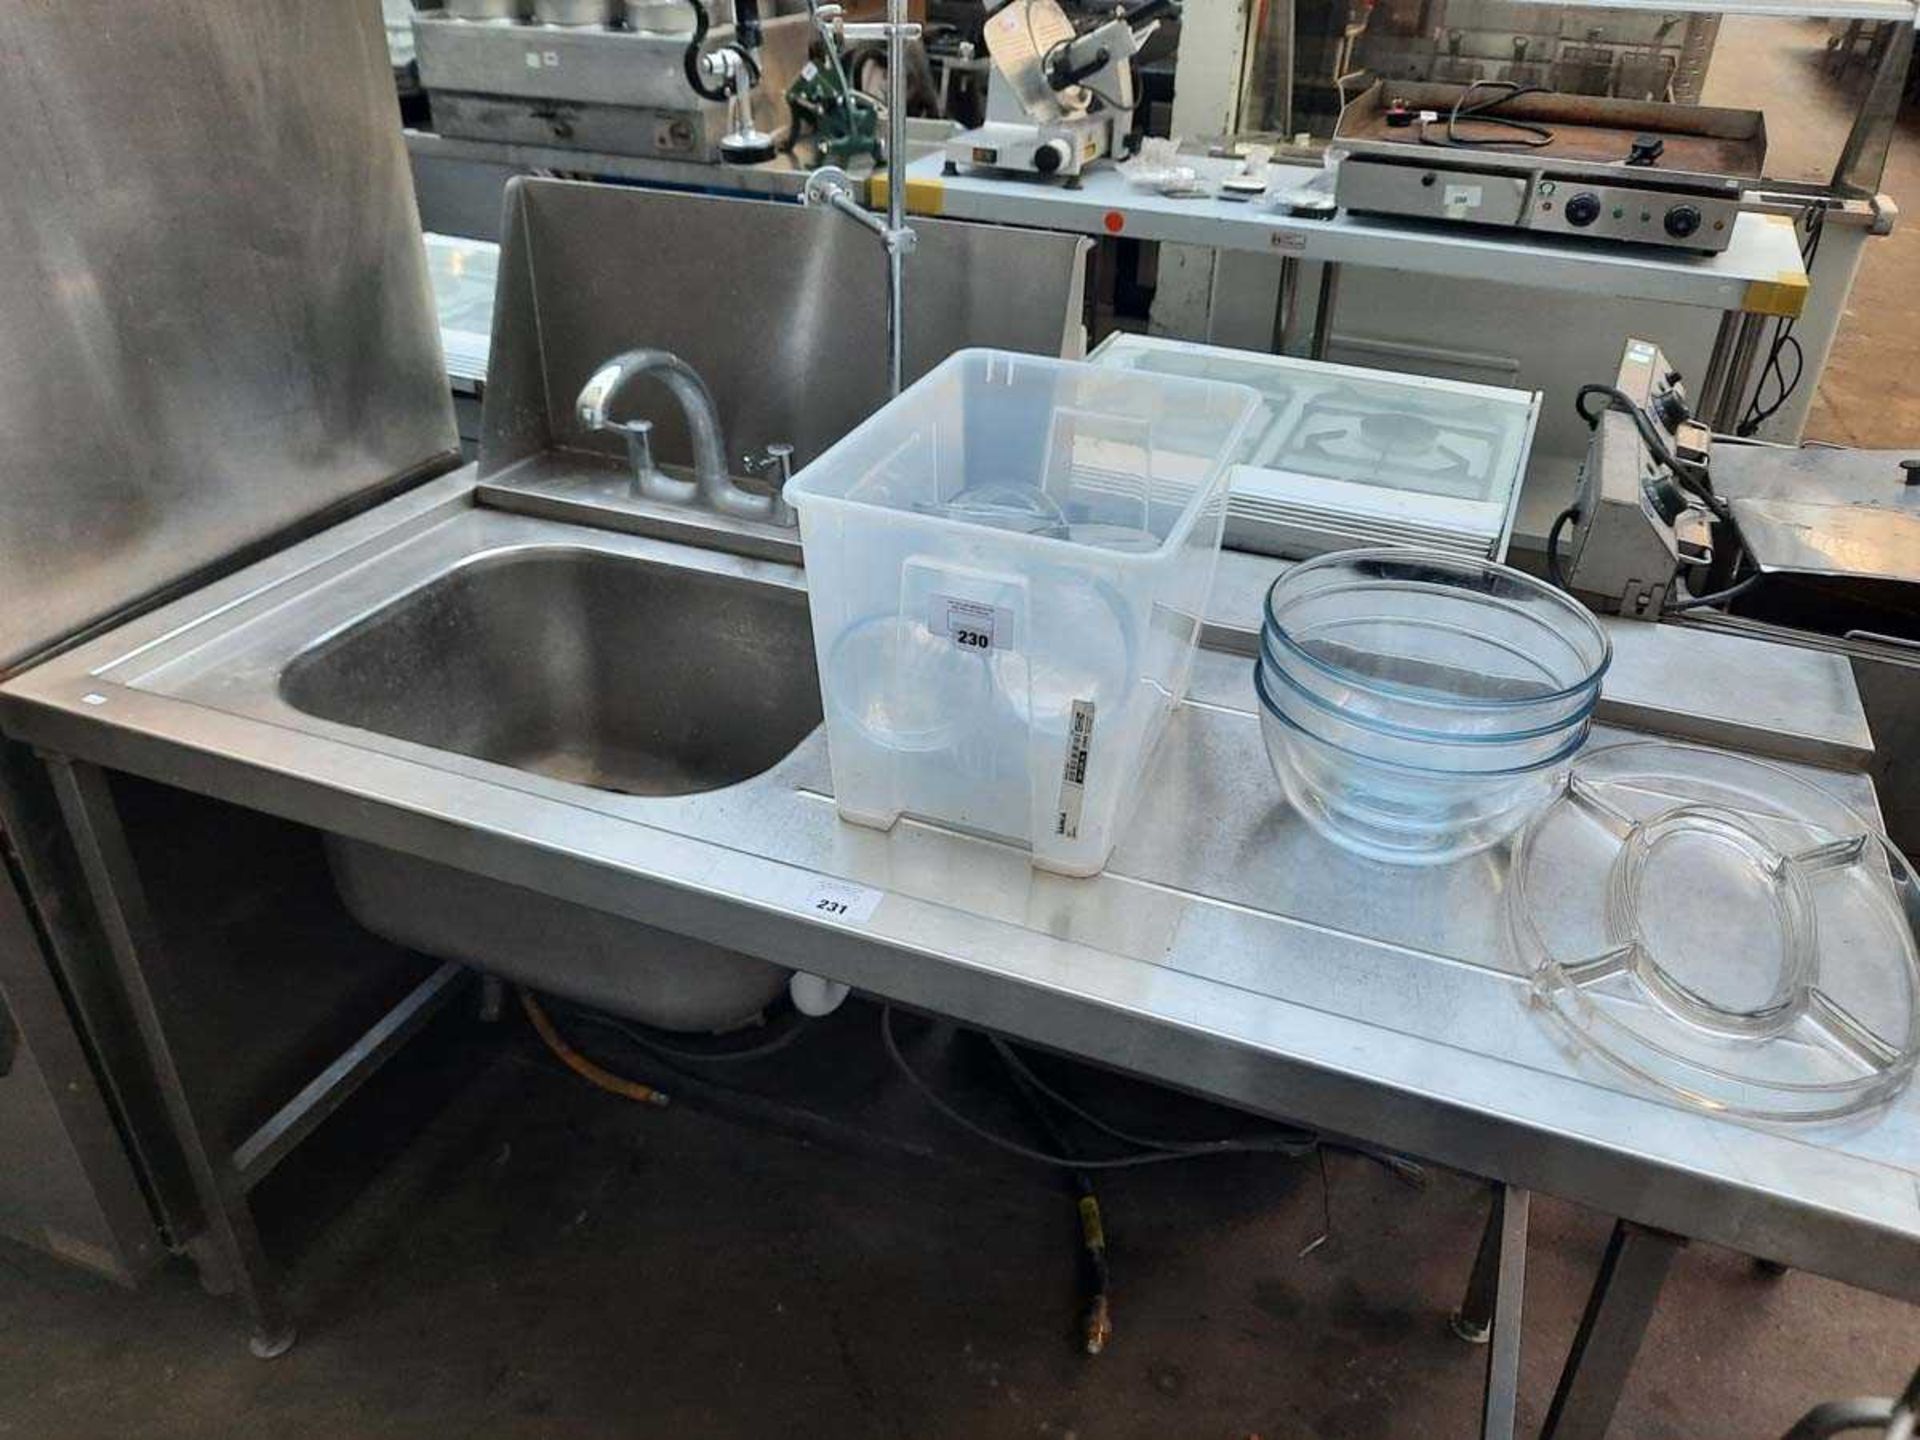 +VAT 150cm stainless steel single bowl sink unit with tap. pre-rinse tap and draining board